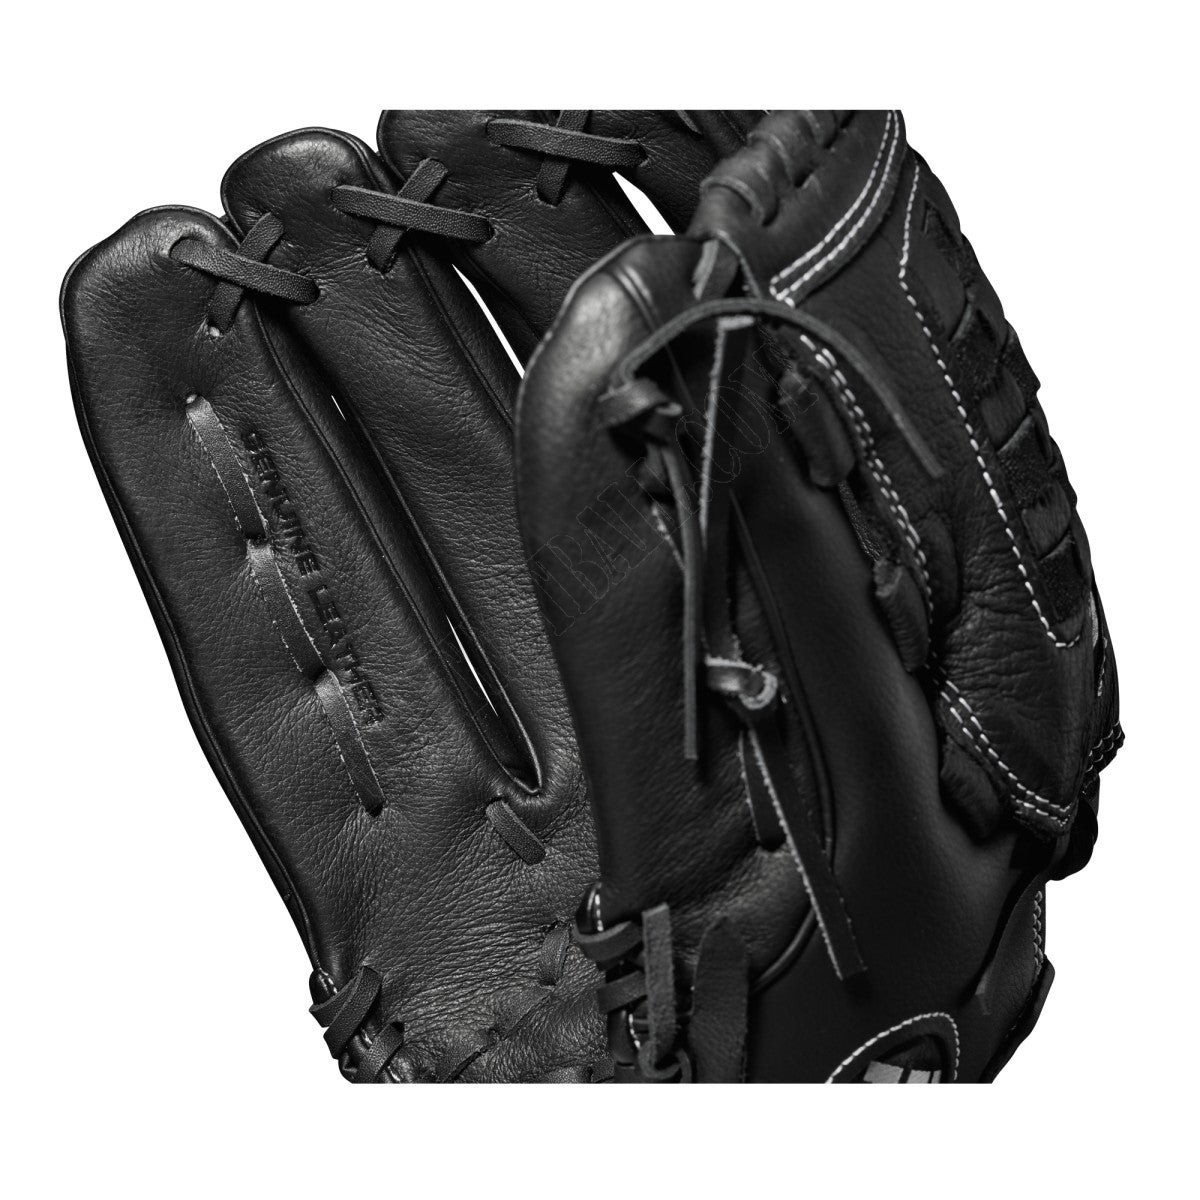 A360 14" Slowpitch Glove - Left Hand Throw ● Wilson Promotions - -6